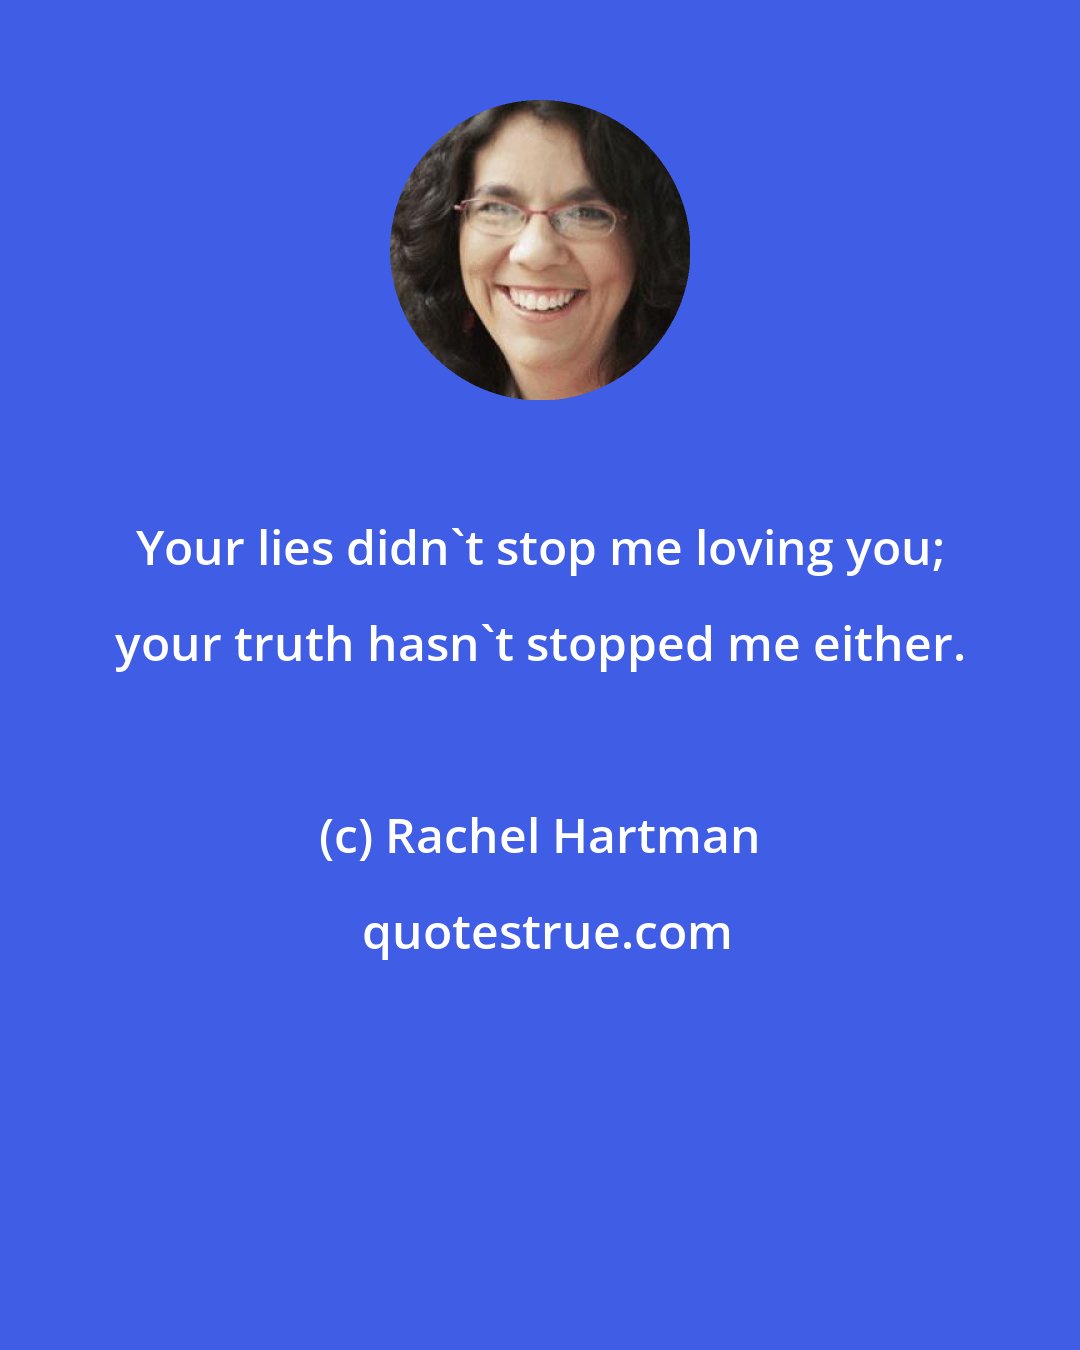 Rachel Hartman: Your lies didn't stop me loving you; your truth hasn't stopped me either.